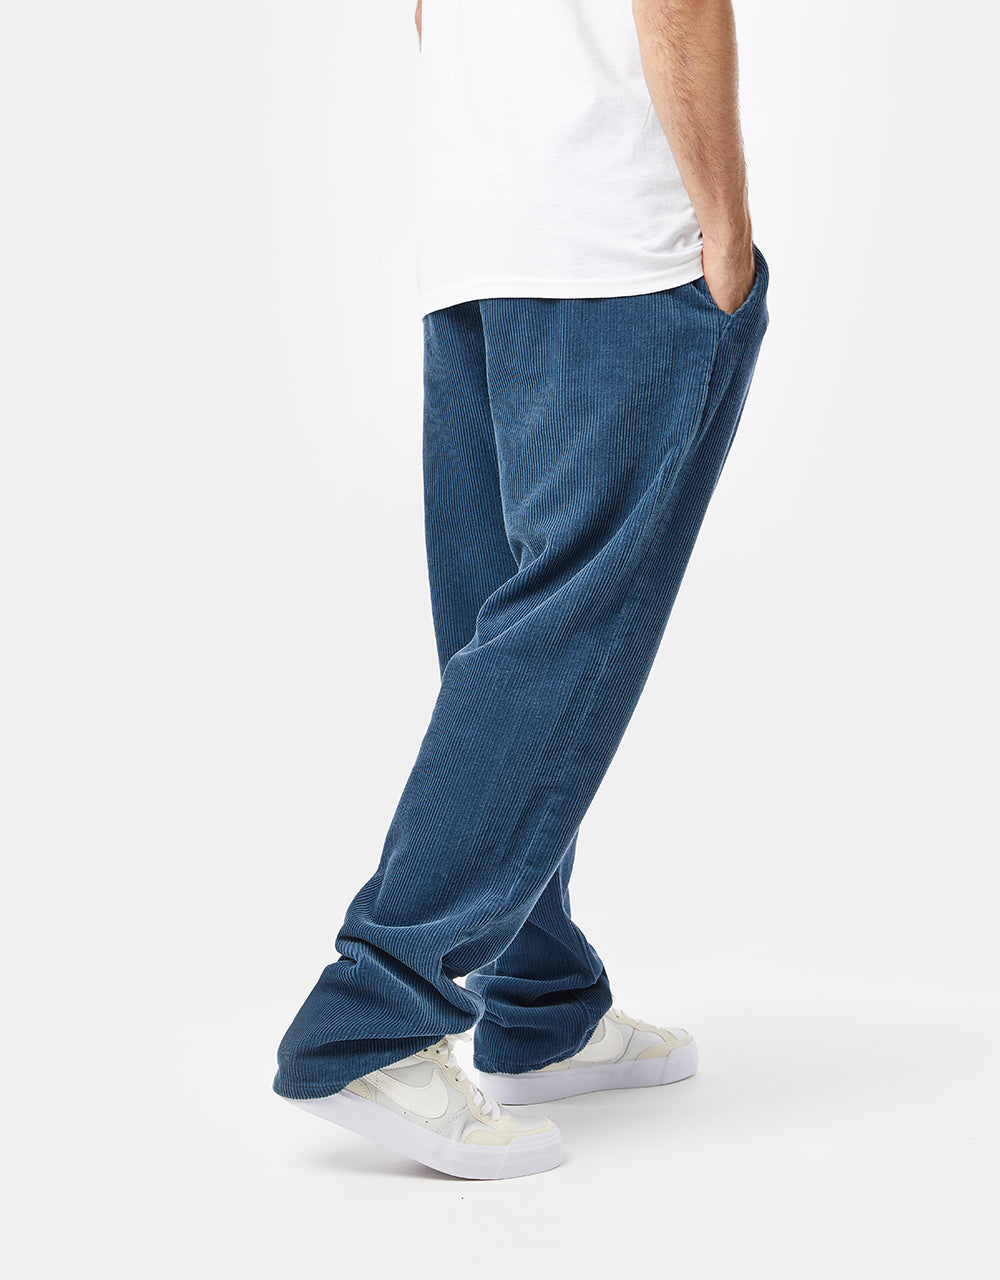 Route One Relaxed Fit Big Wale Cords - Air Force Blue